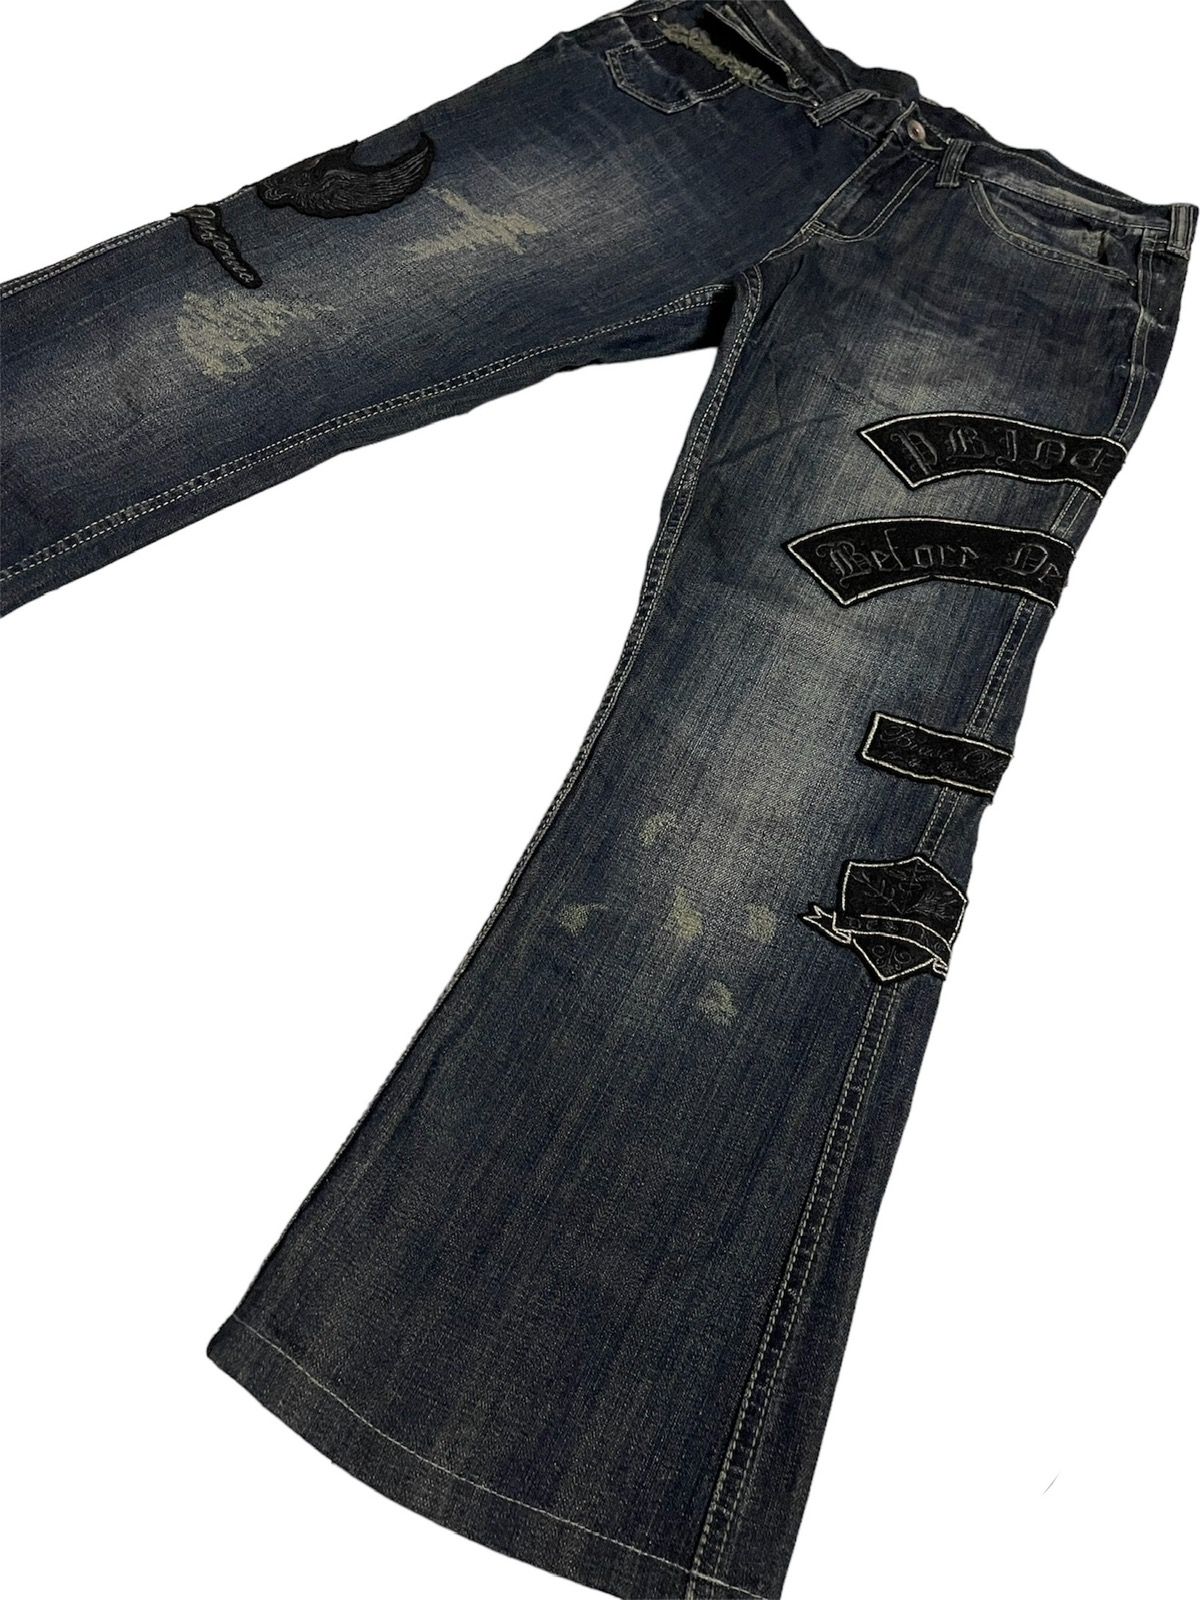 Pre-owned Archival Clothing X Semantic Design Vintage Semantic Design Flared Patches Design Denim Pants (size 32)